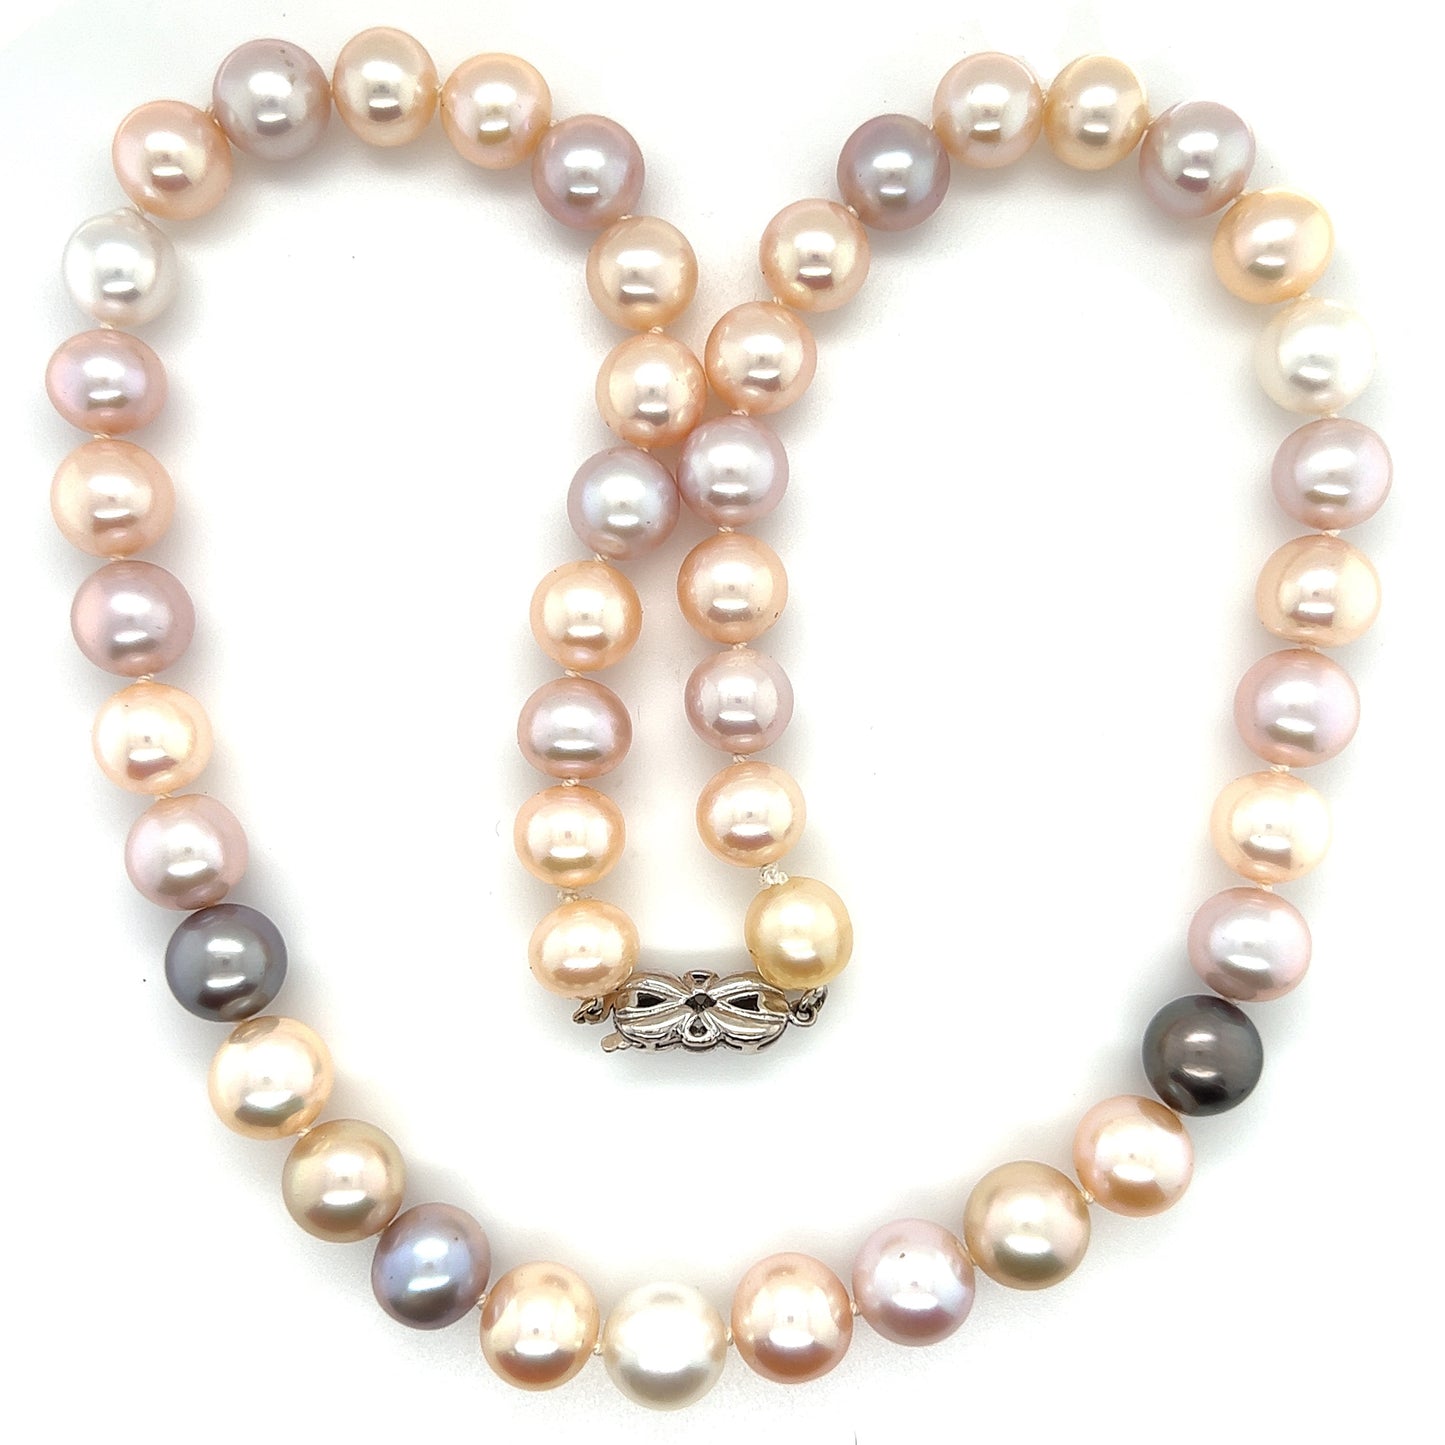 Multicolor Pearl Necklace with Forty-Seven 9.5mm Pearls and 14K White Gold Catch Top Heart View